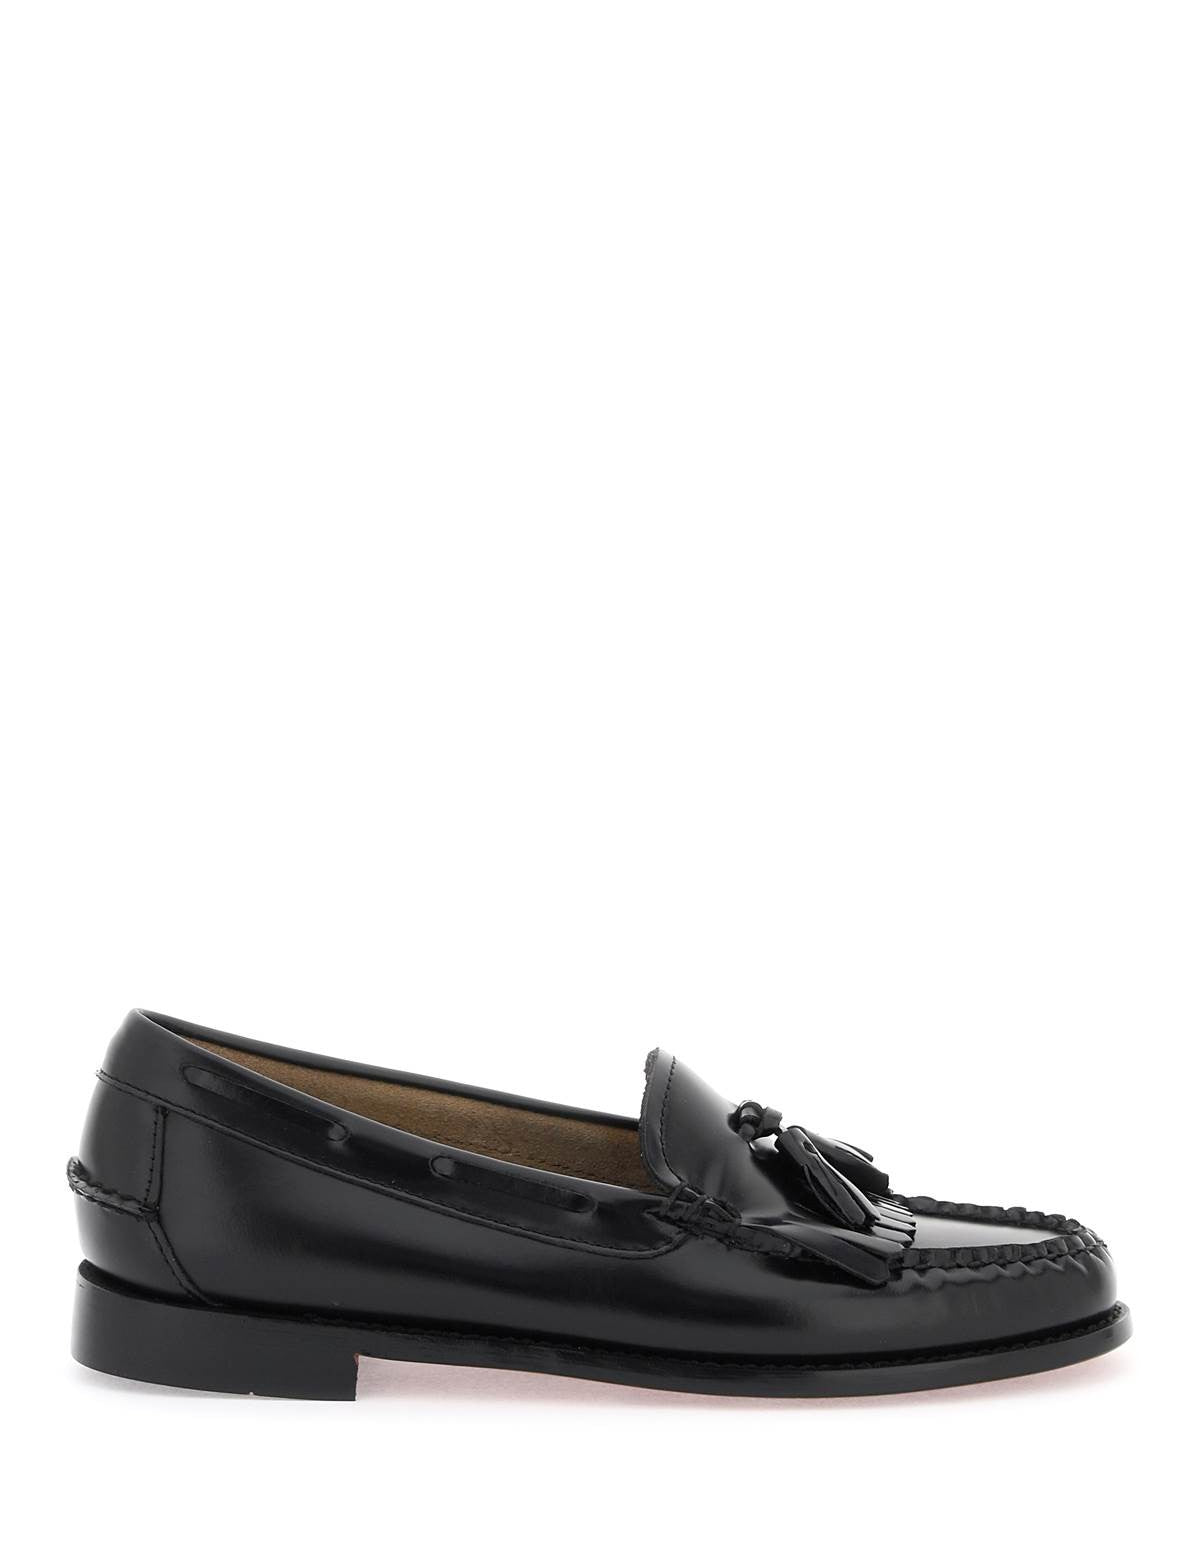 gh-bass-esther-kiltie-weejuns-loafers-in-brushed-leather_1cc96614-c291-4157-a131-711337214335.jpg